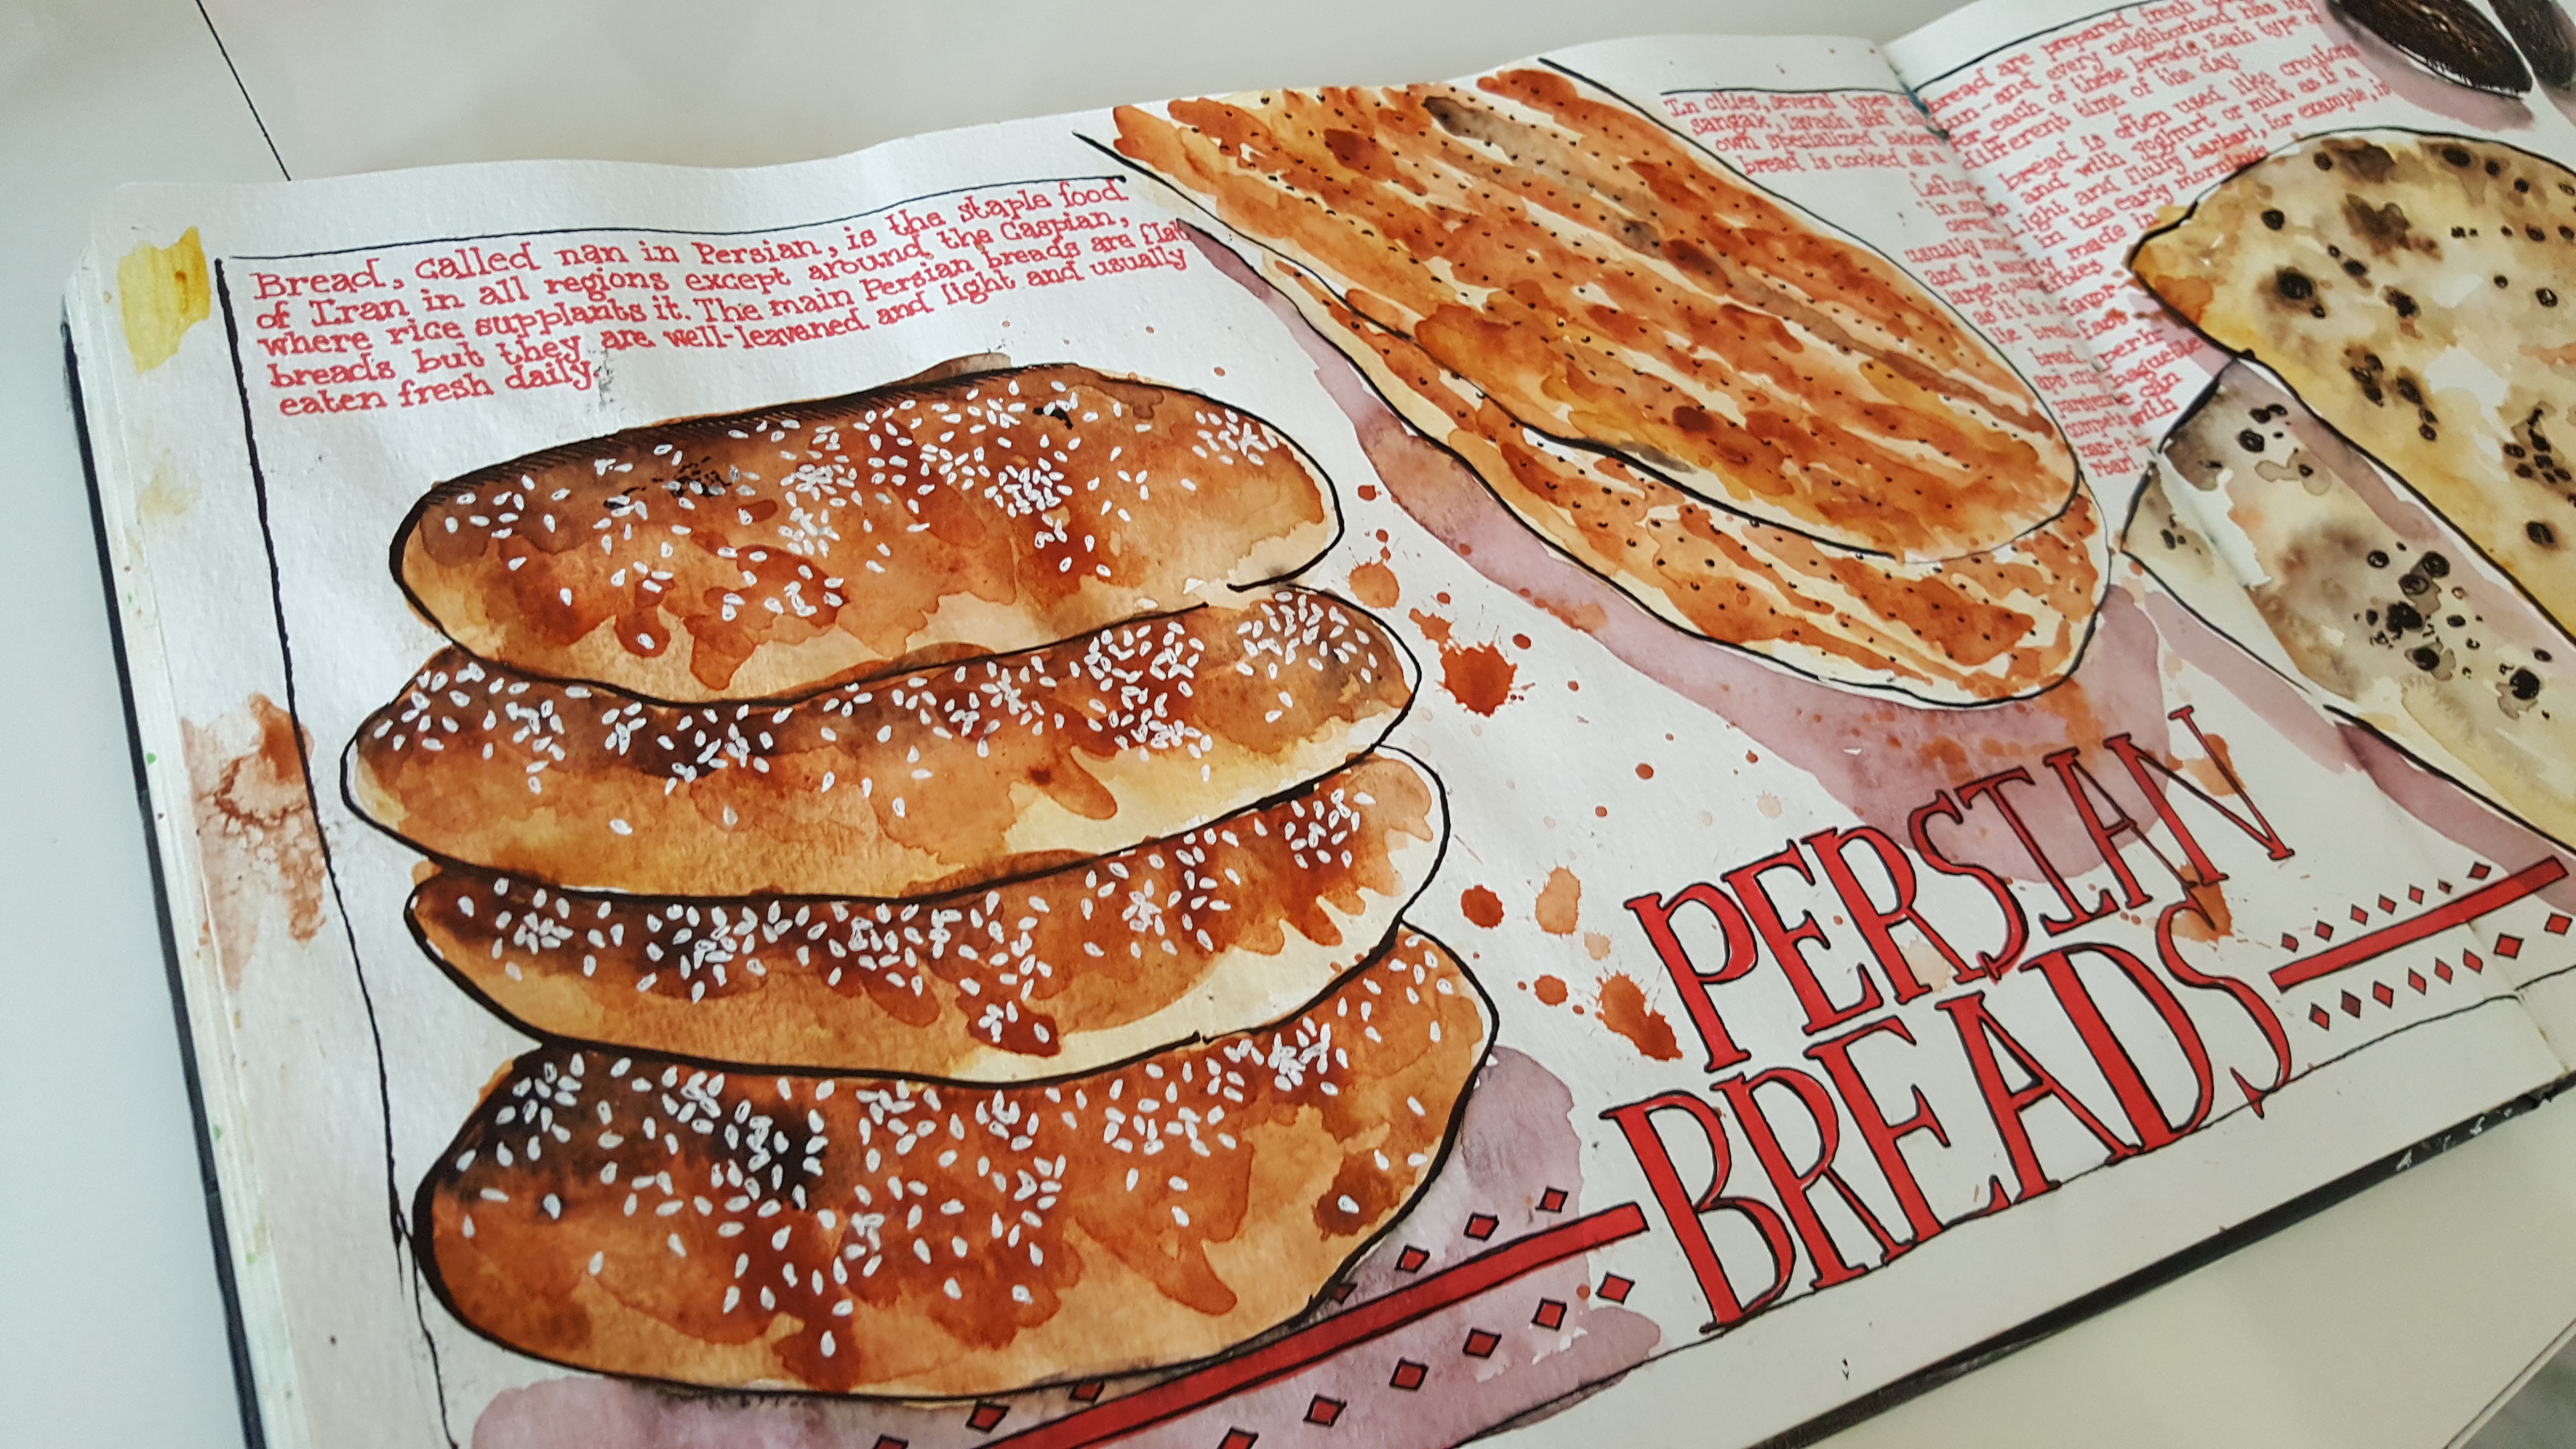 Persian Breads : Baked to golden perfection!